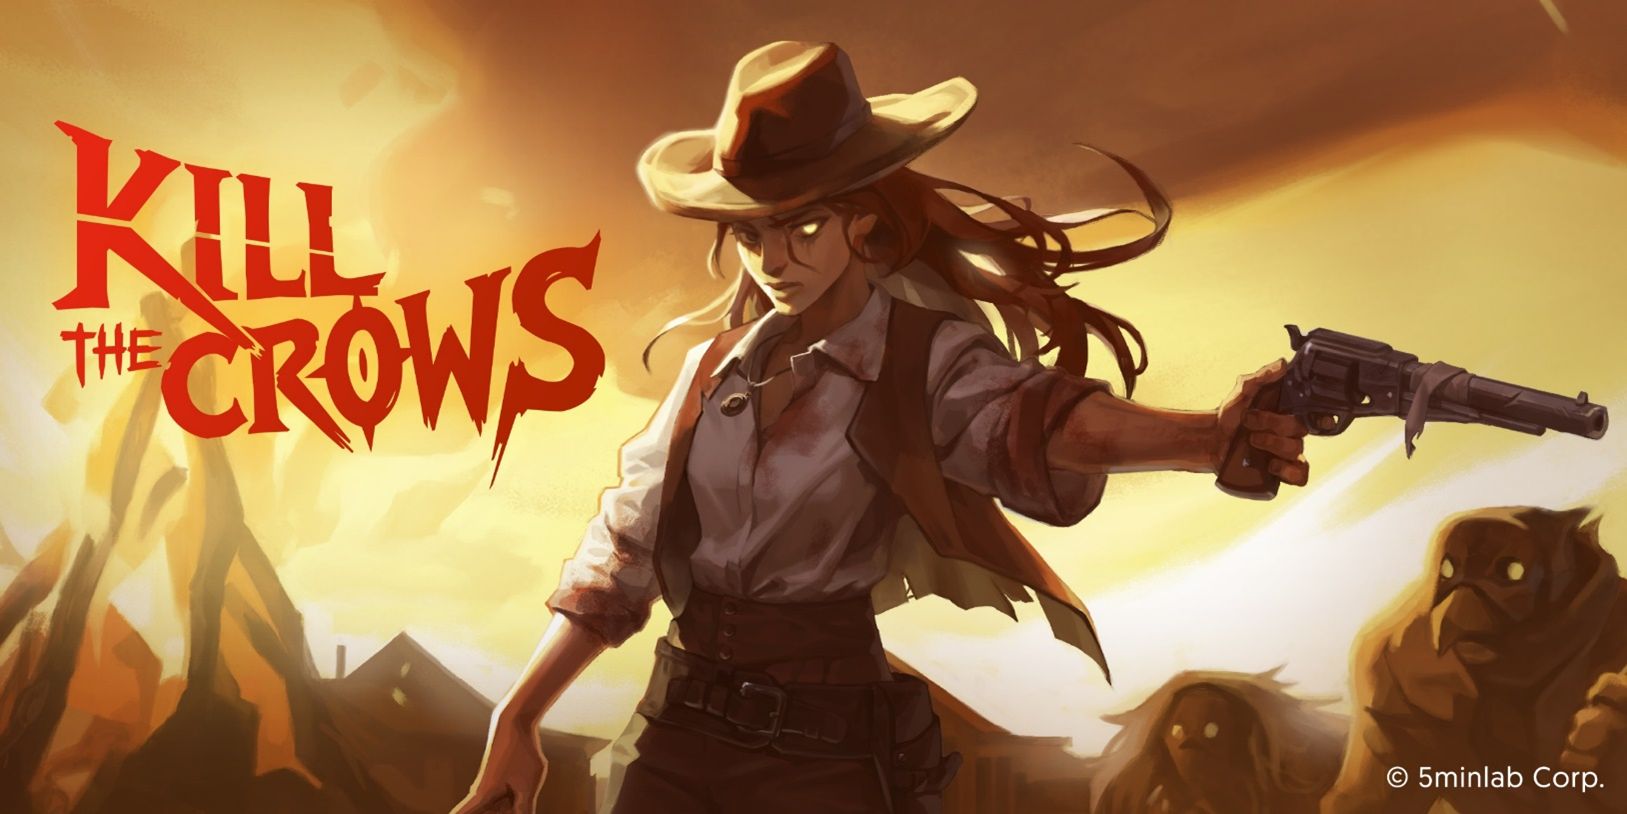 10 Best Cowboy Anime for Western Lovers